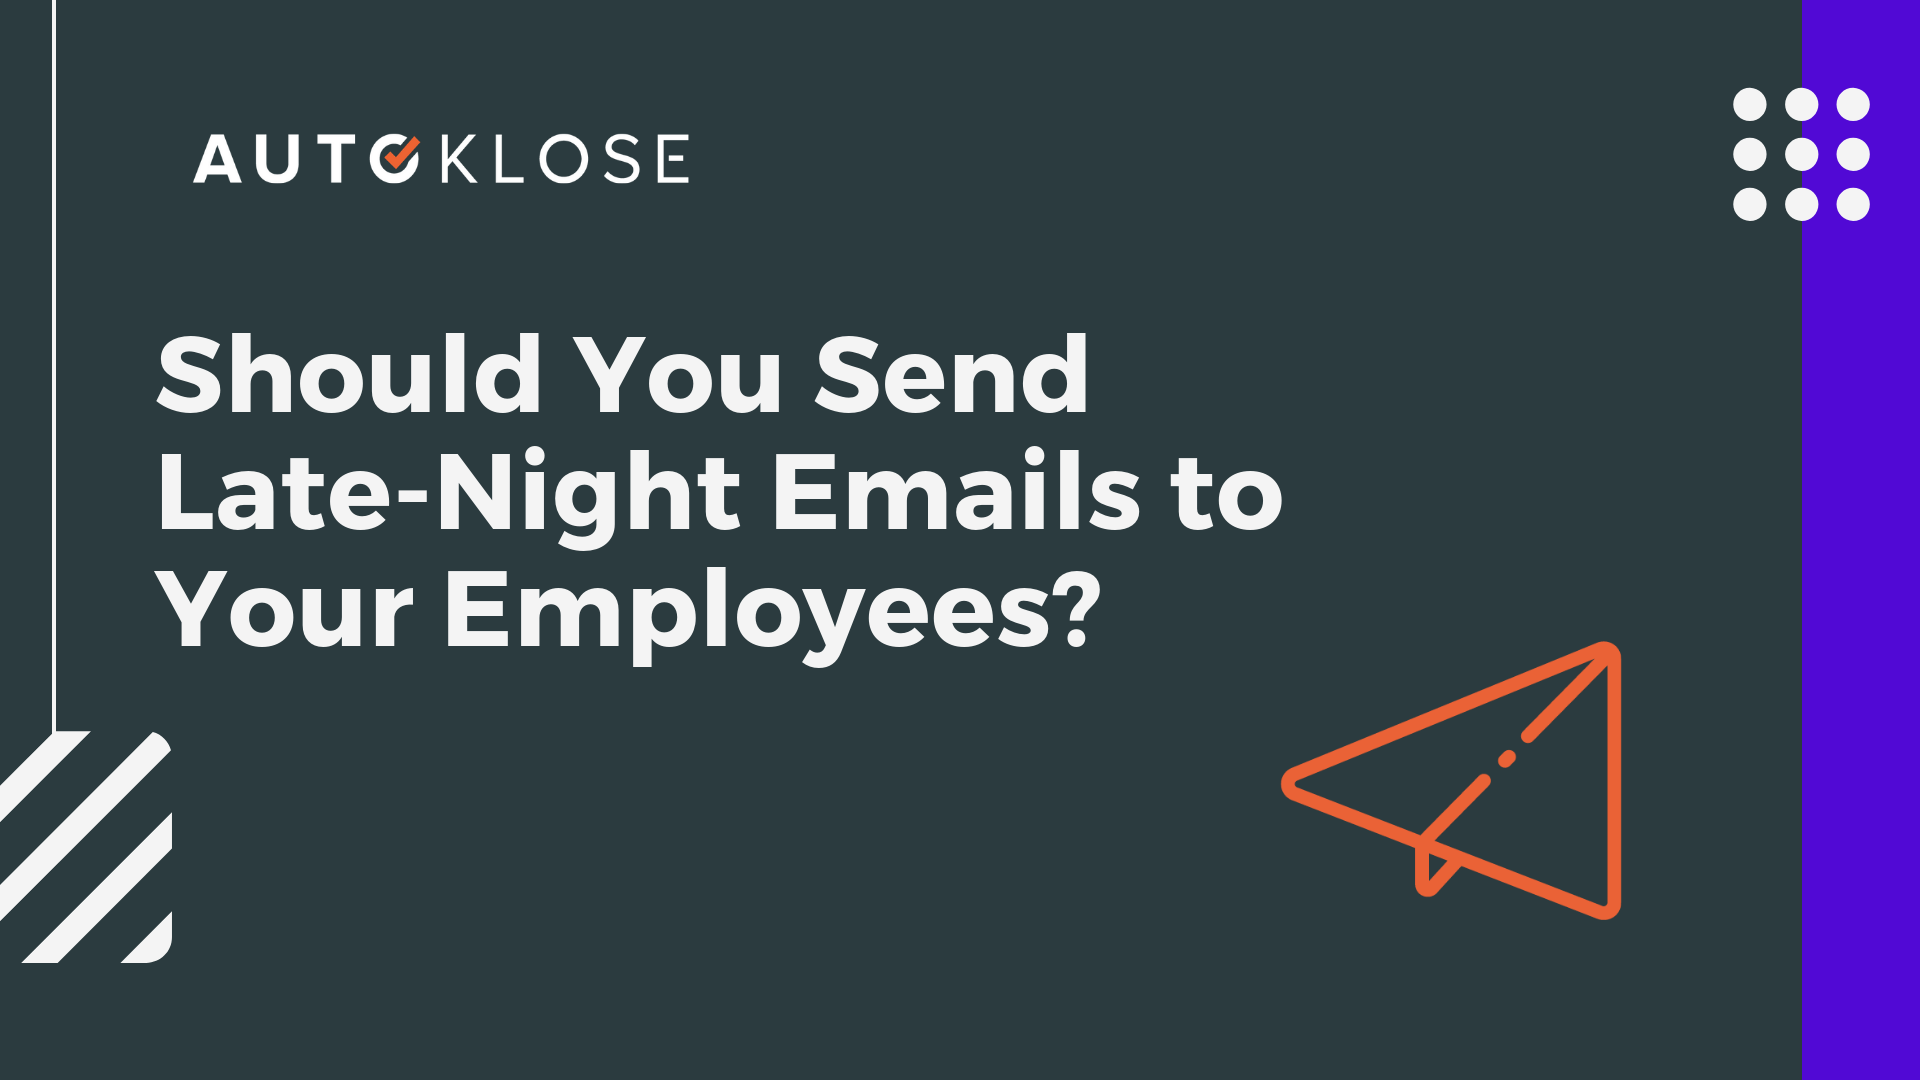 Should You Send Late-Night Emails to Your Employees? Autoklose